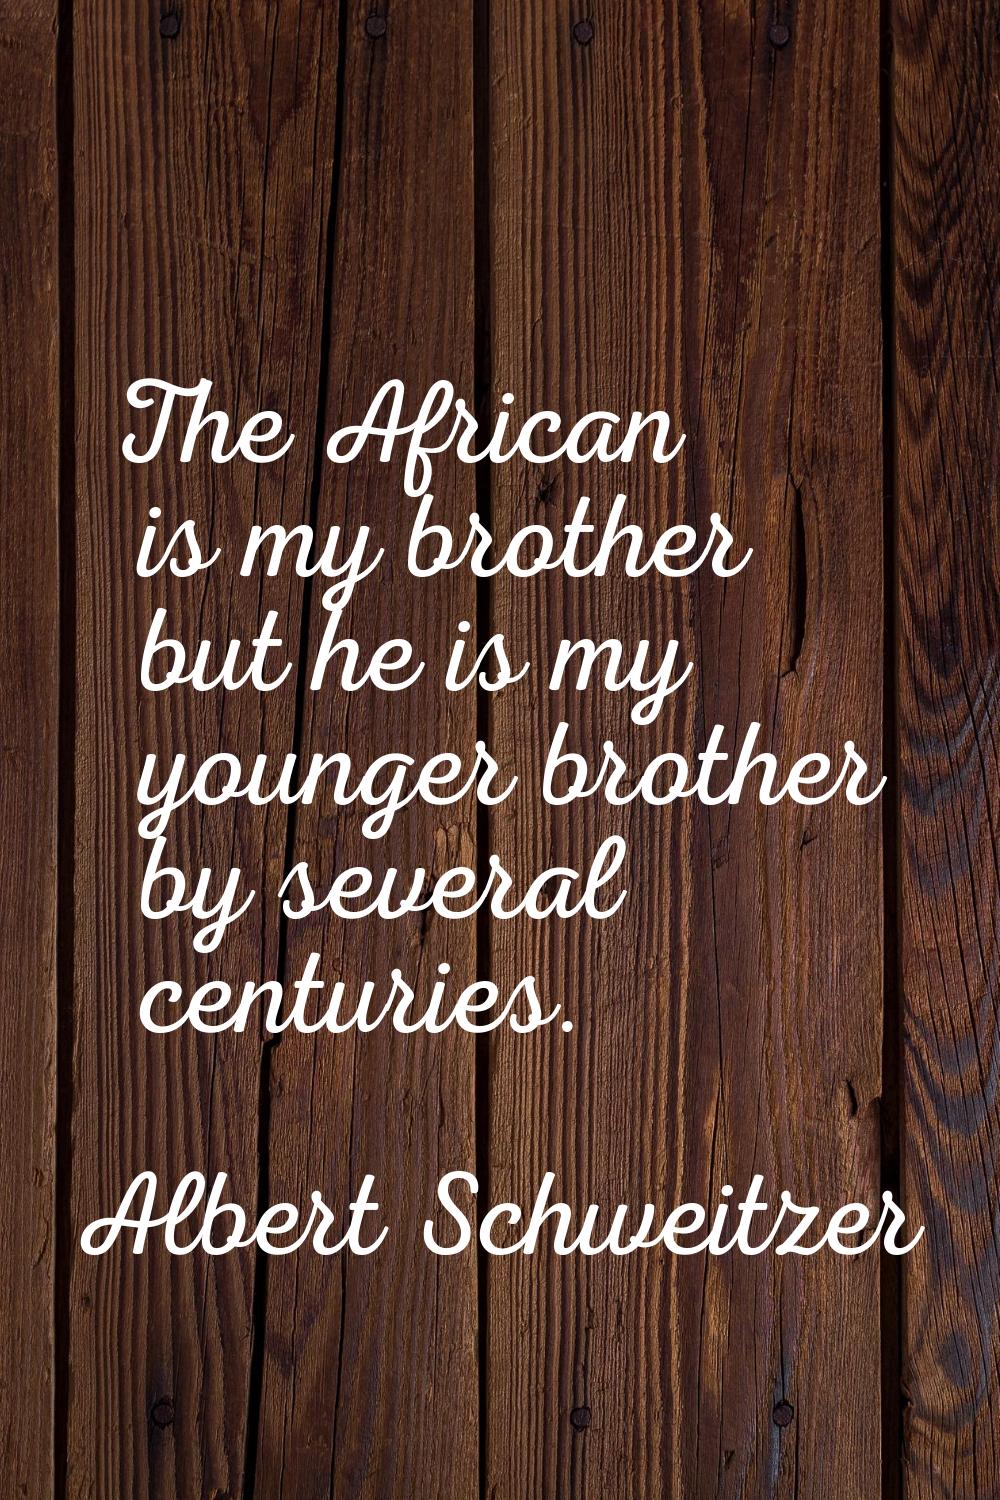 The African is my brother but he is my younger brother by several centuries.